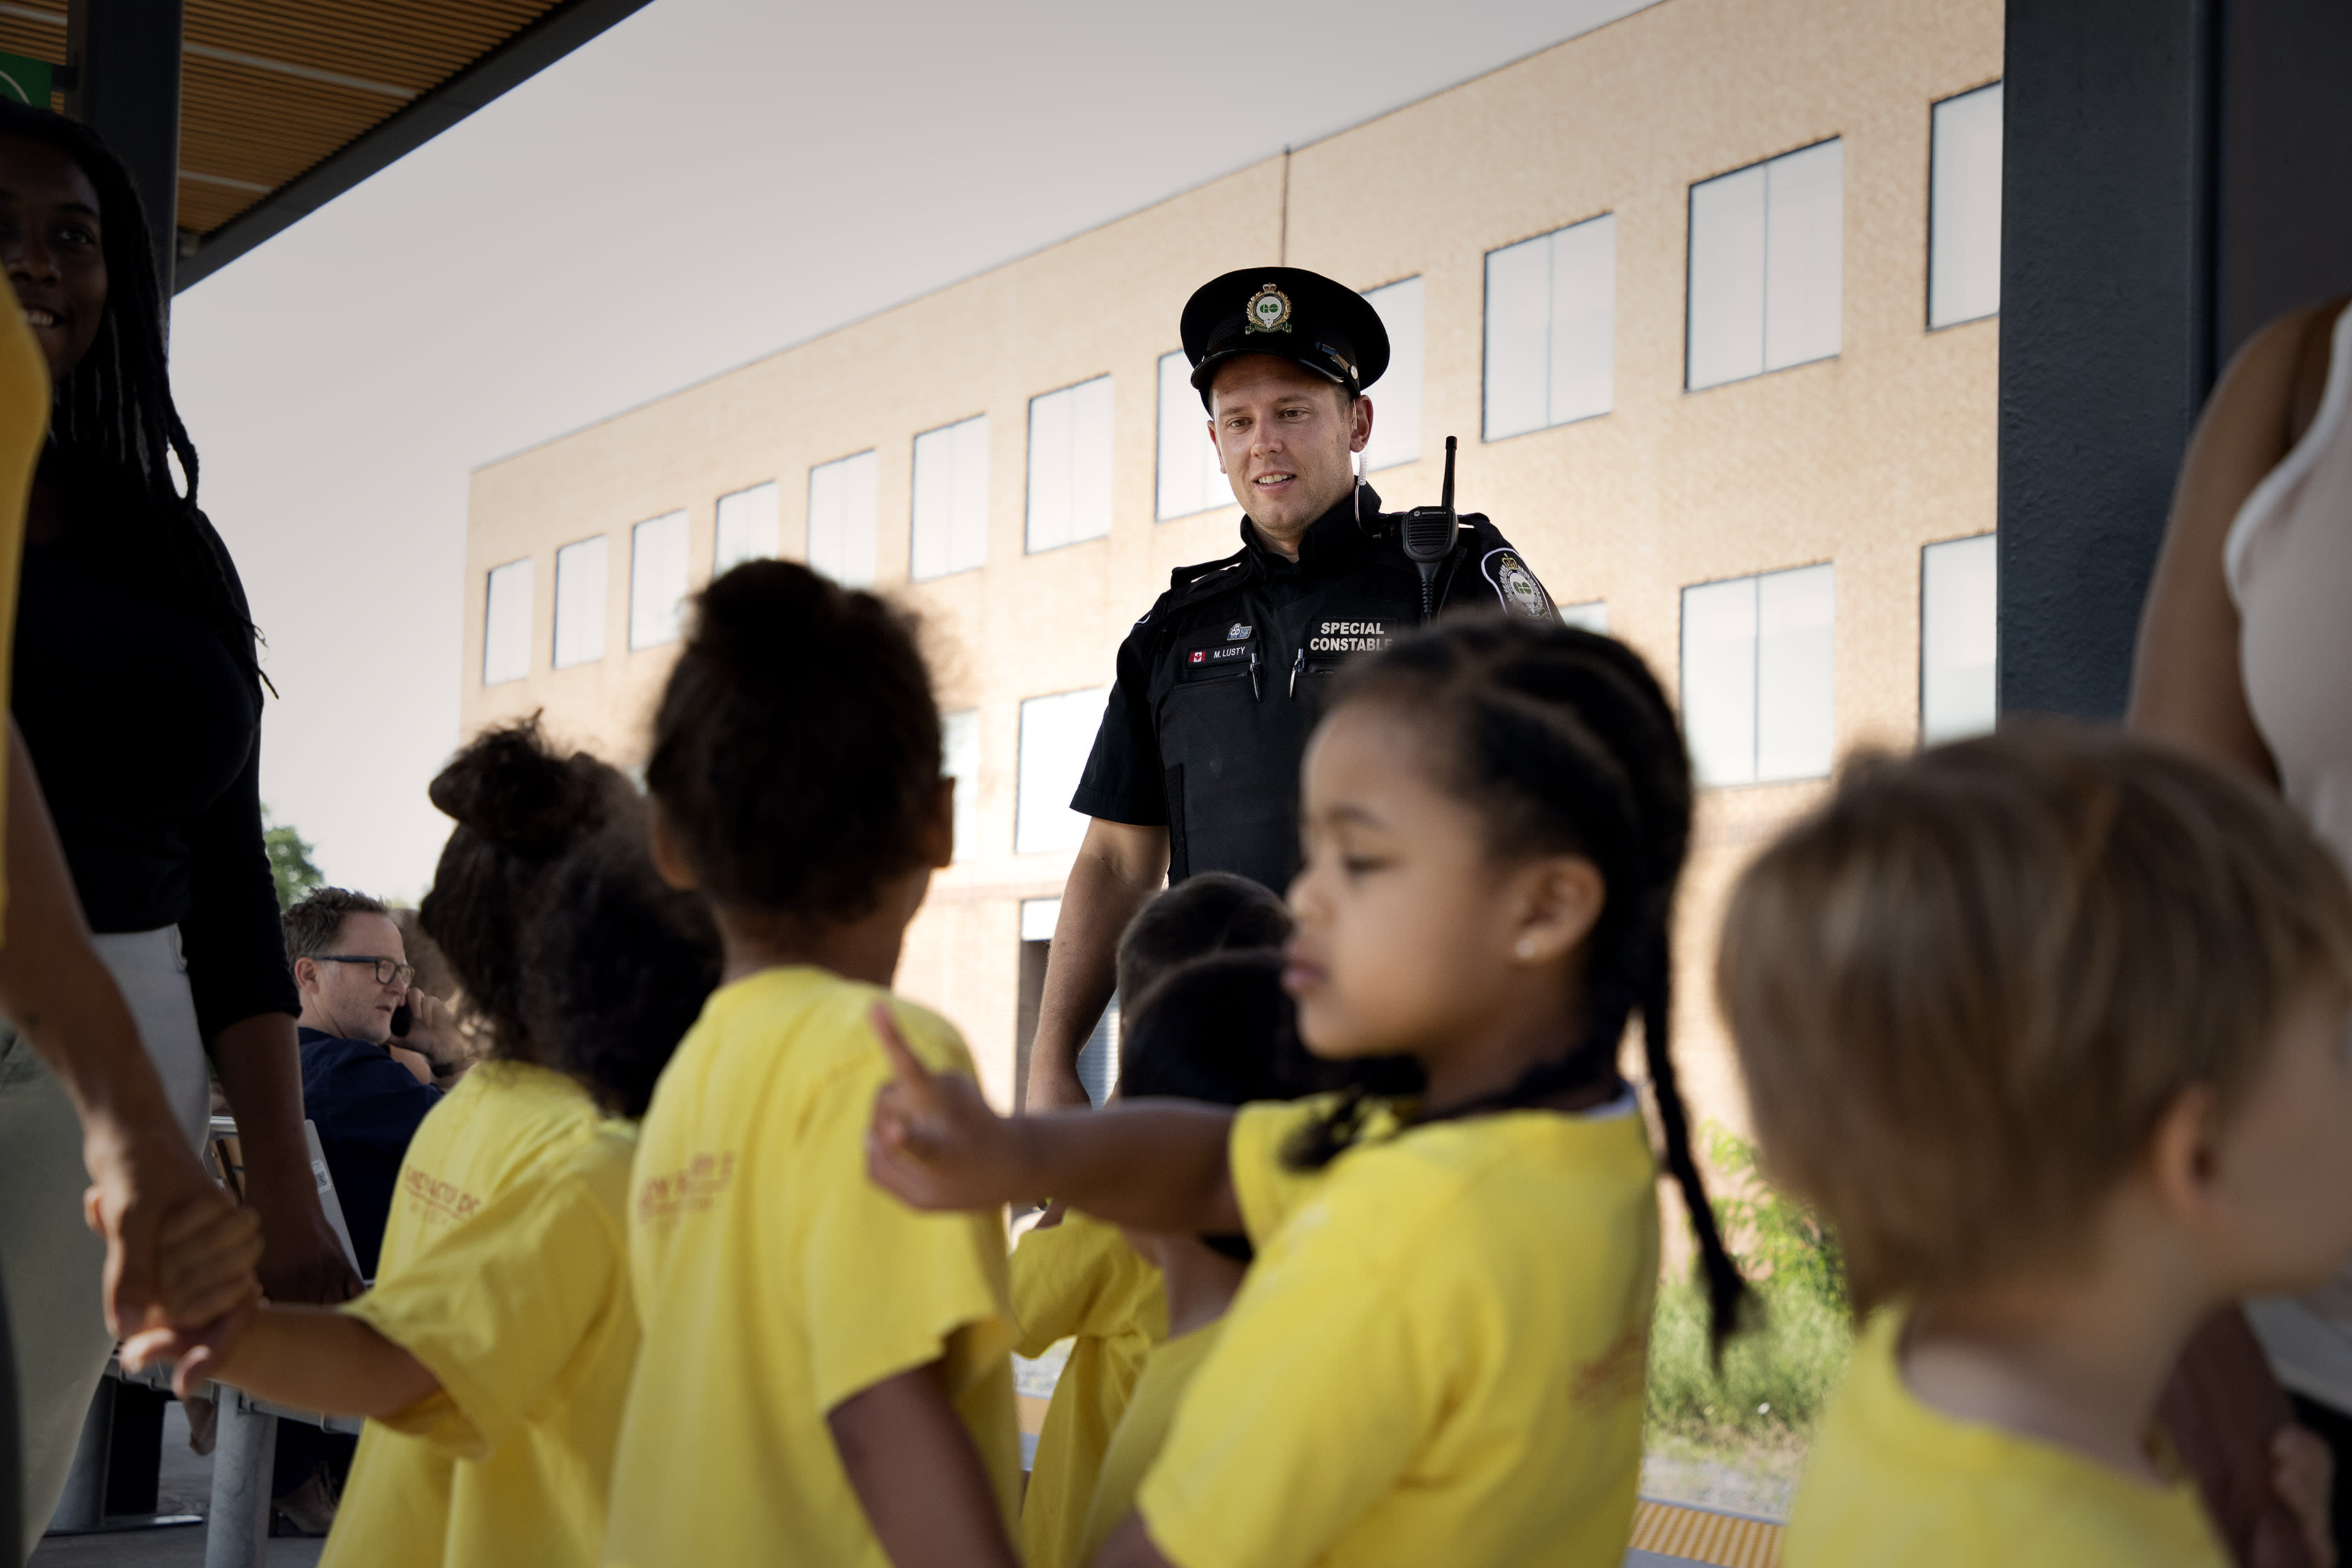 A transit safety officers talks to a group of children gathered on the platform.